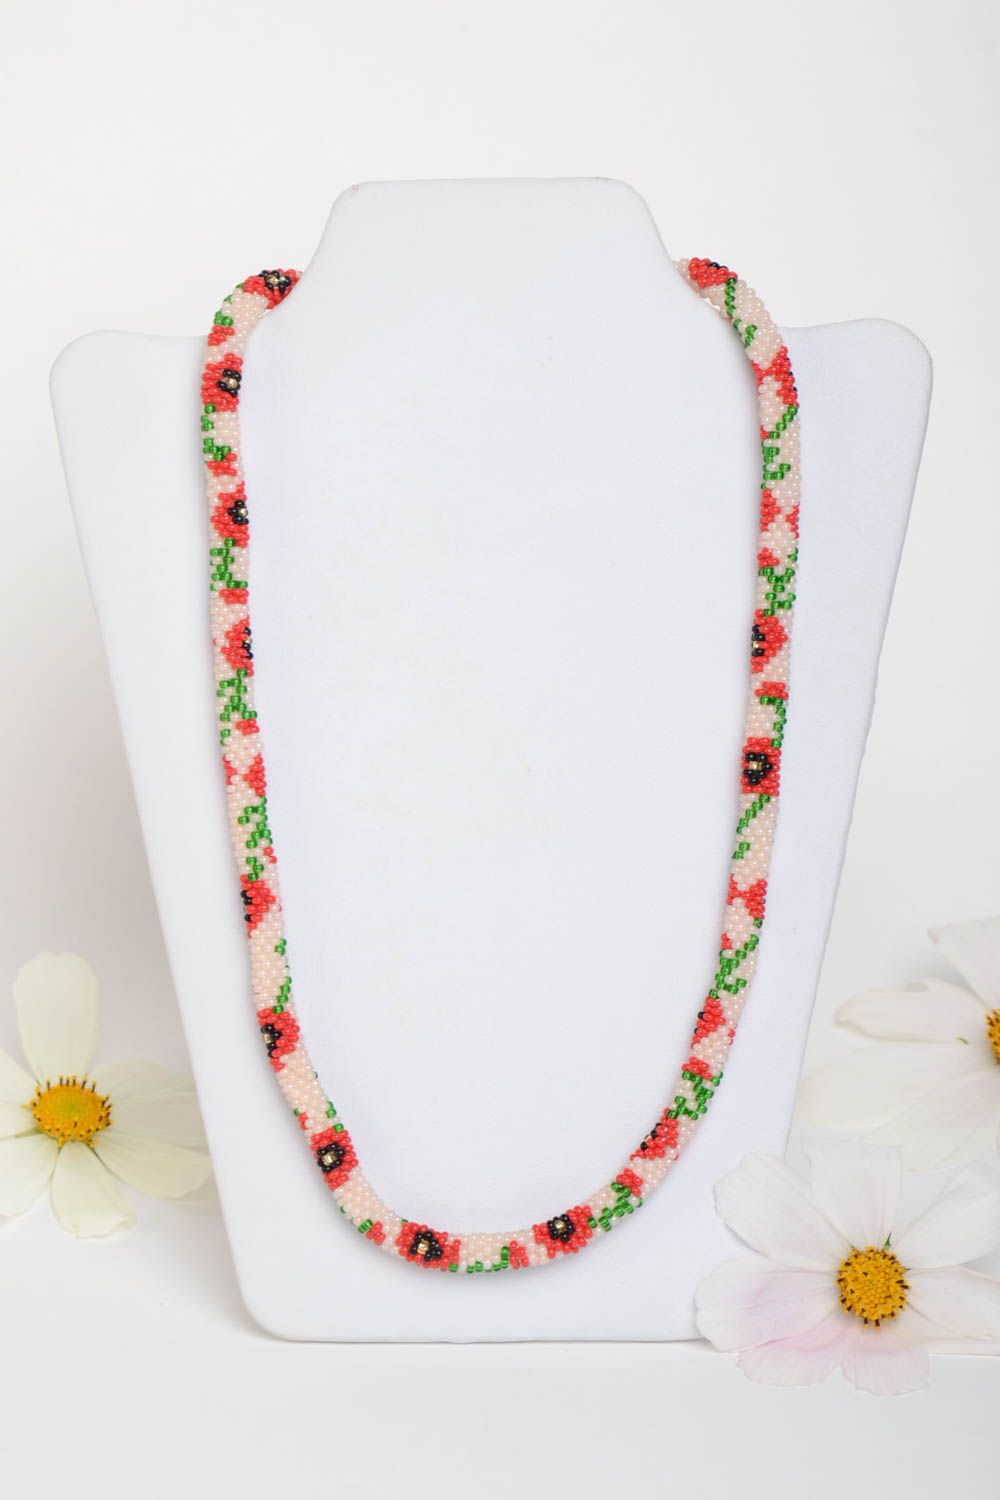 Beaded necklace homemade jewelry women accessories beaded jewelry gift for girl photo 1